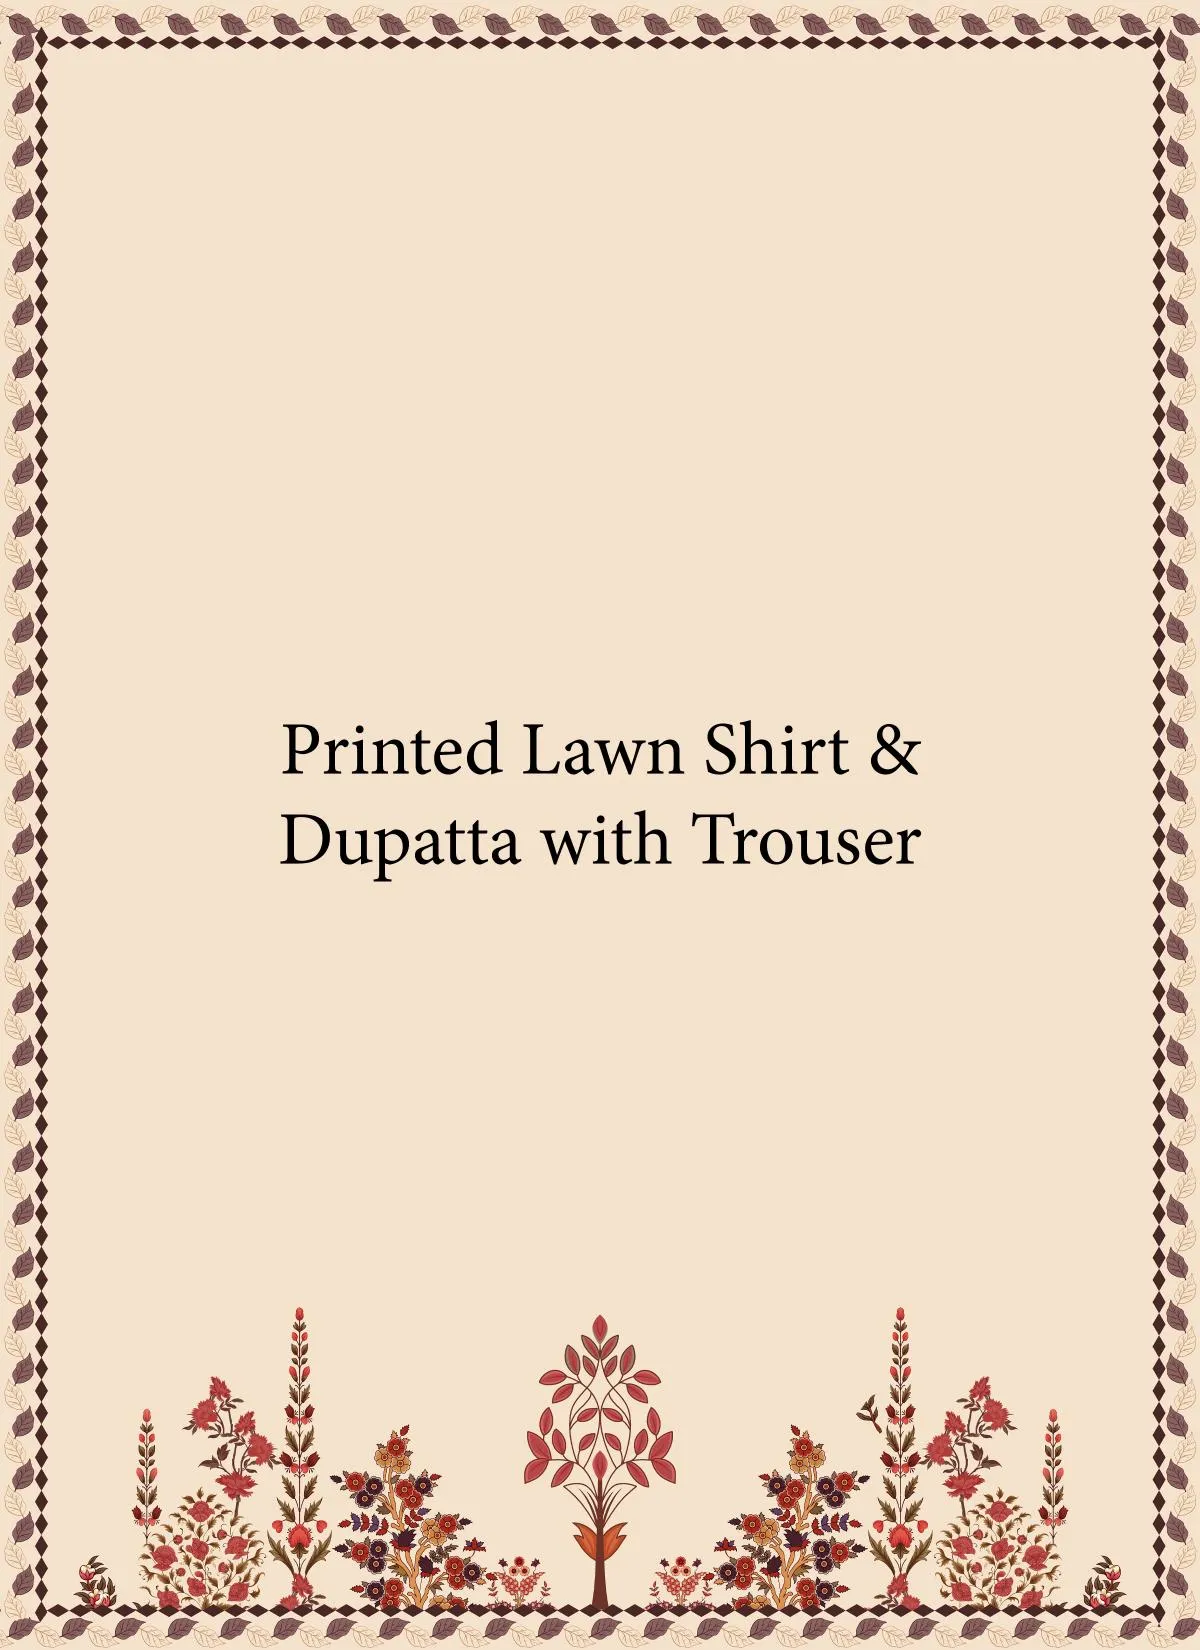 Printed lawn shirt and dupatta with trouser